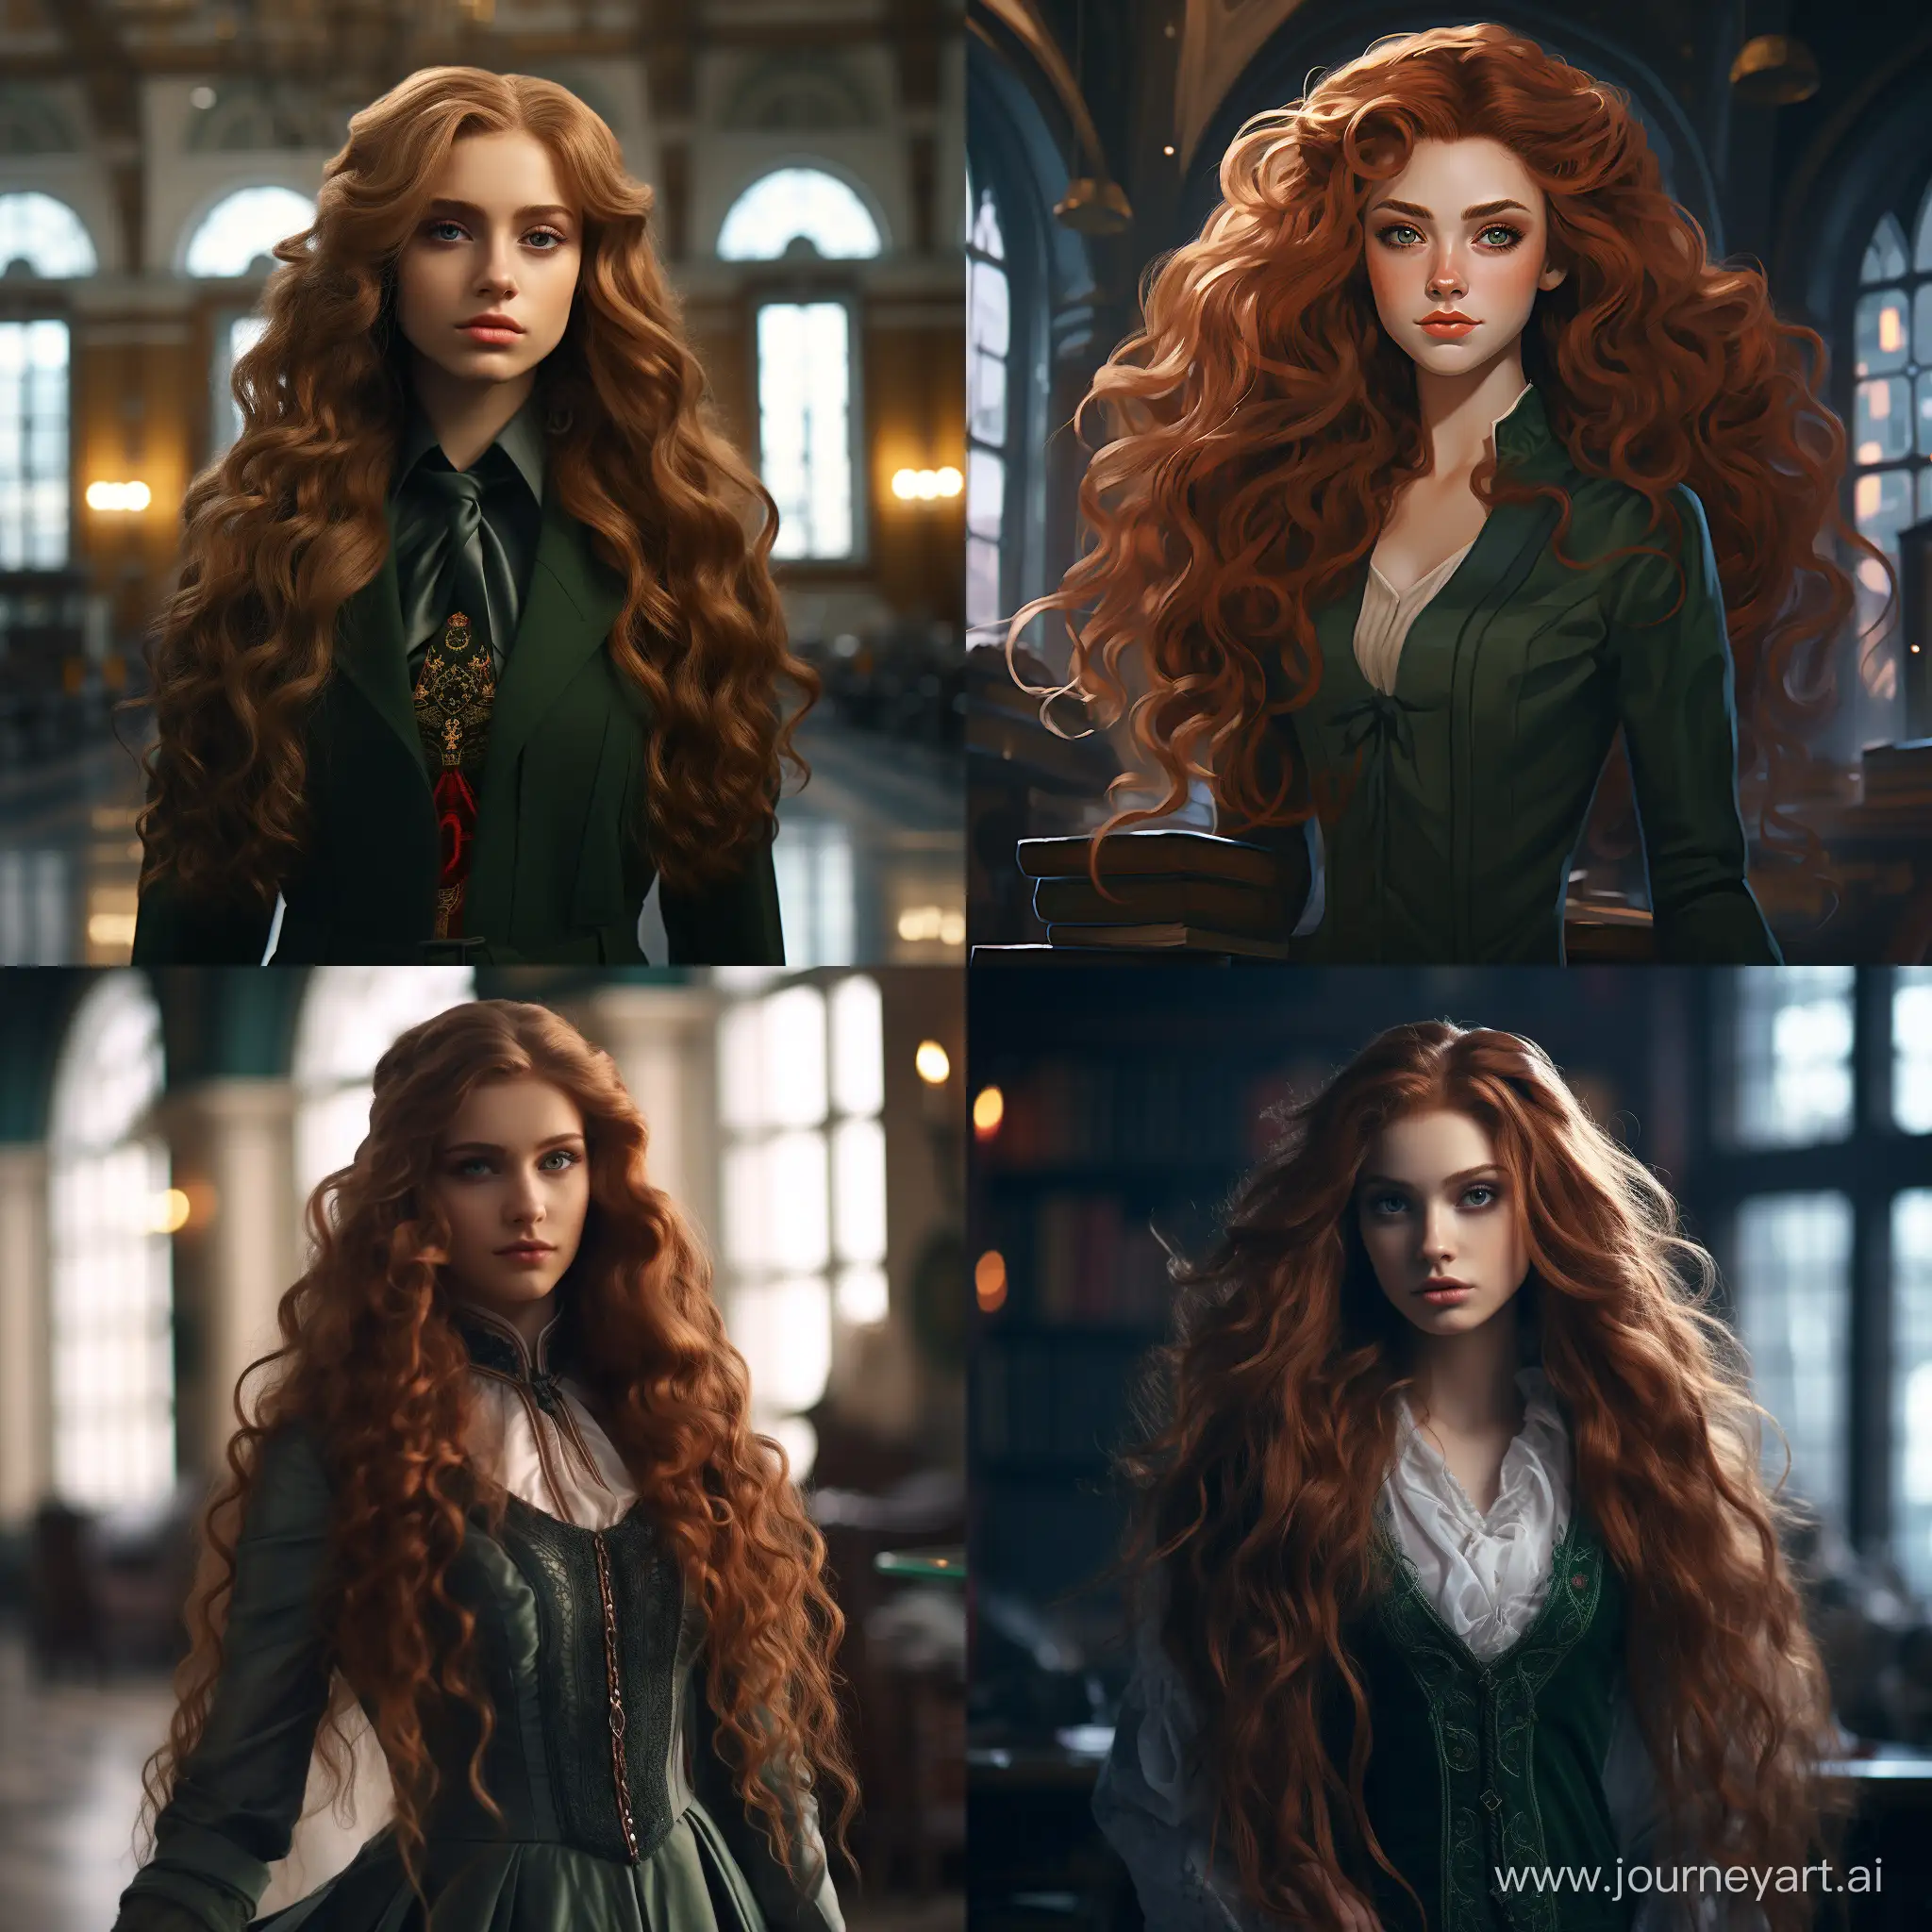 Russian magical girl, a student with long red curly hair in the shape of Slytherin at Hogwarts